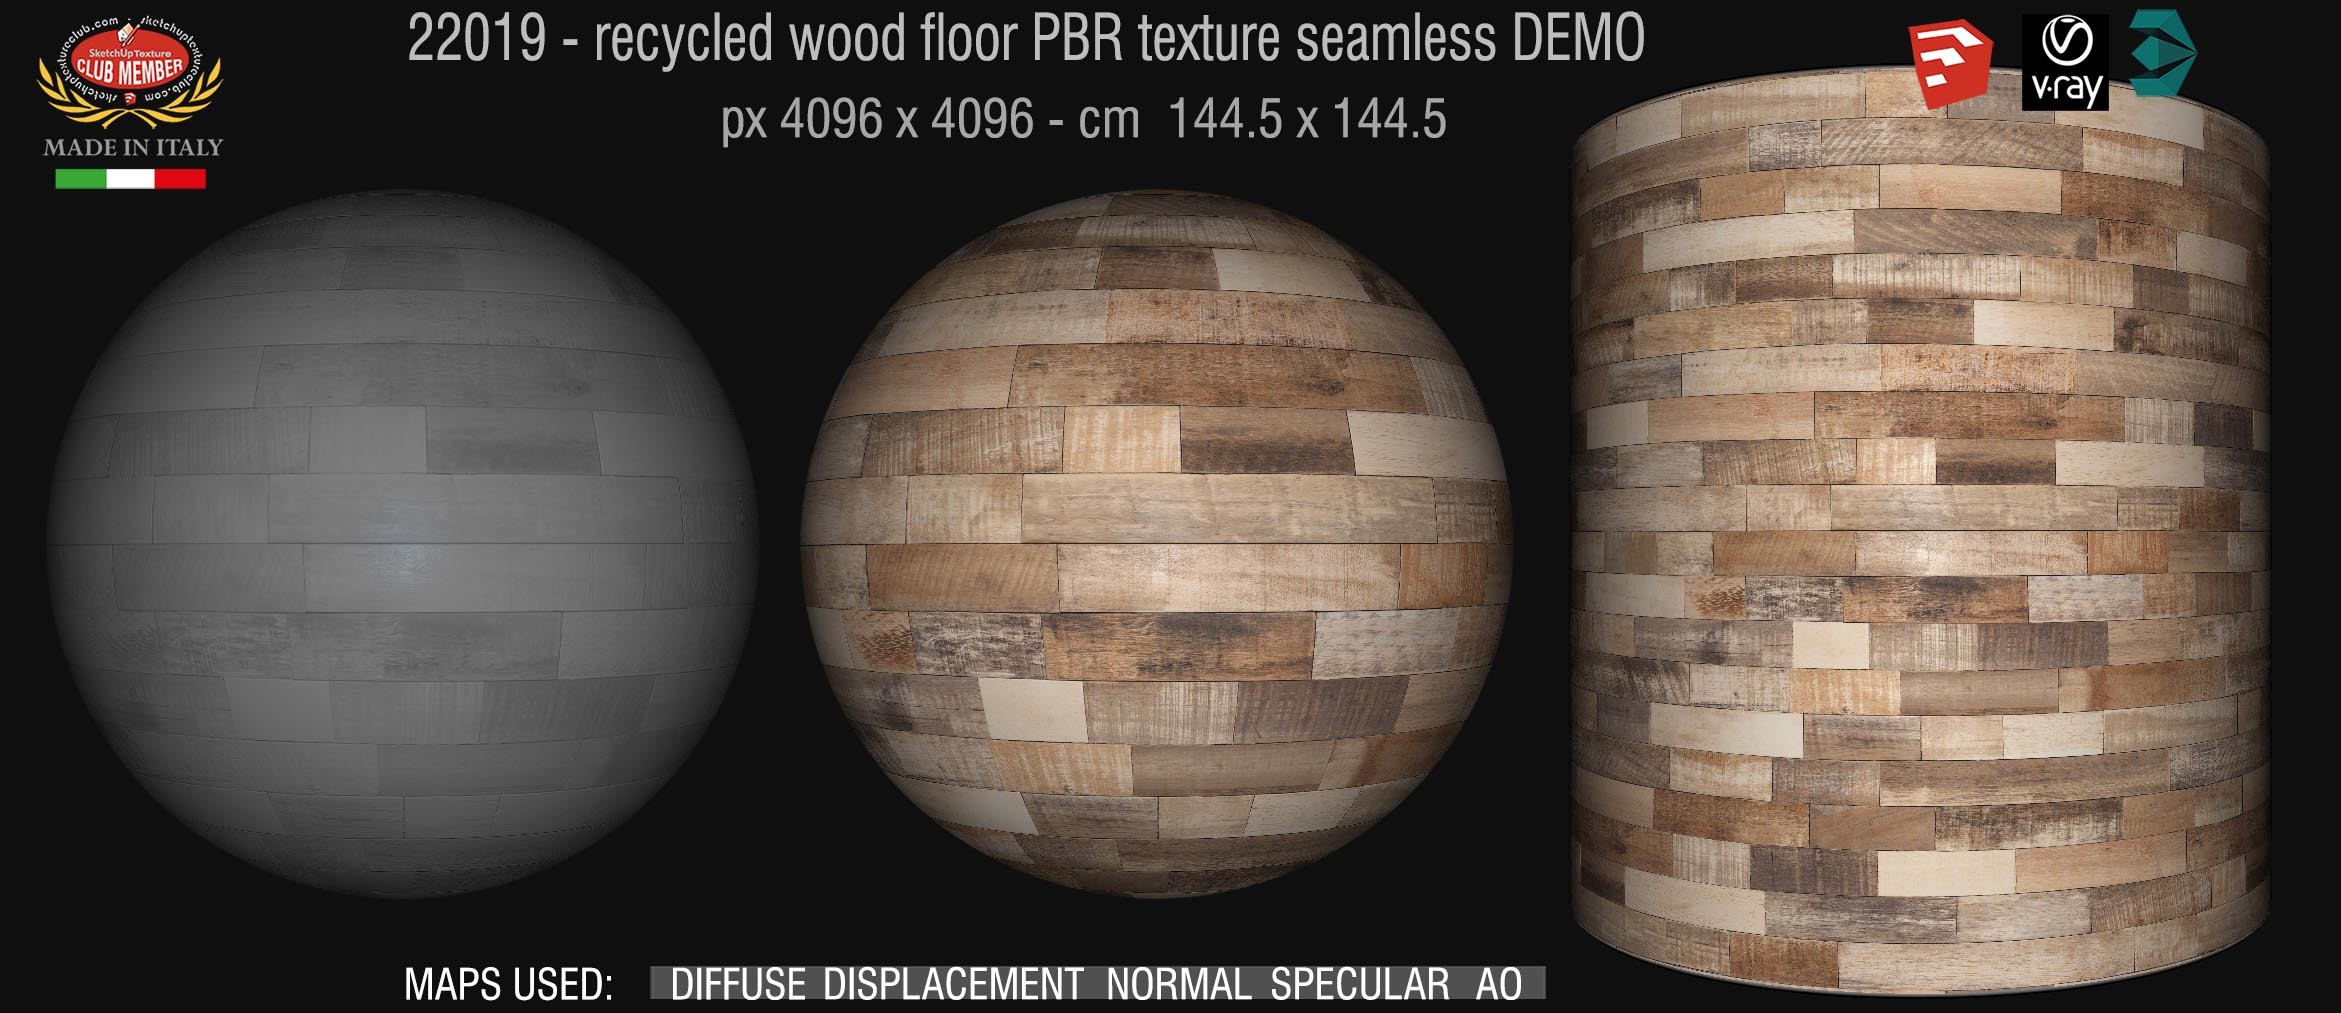 22019 recycled wood floor PBR texture seamless DEMO